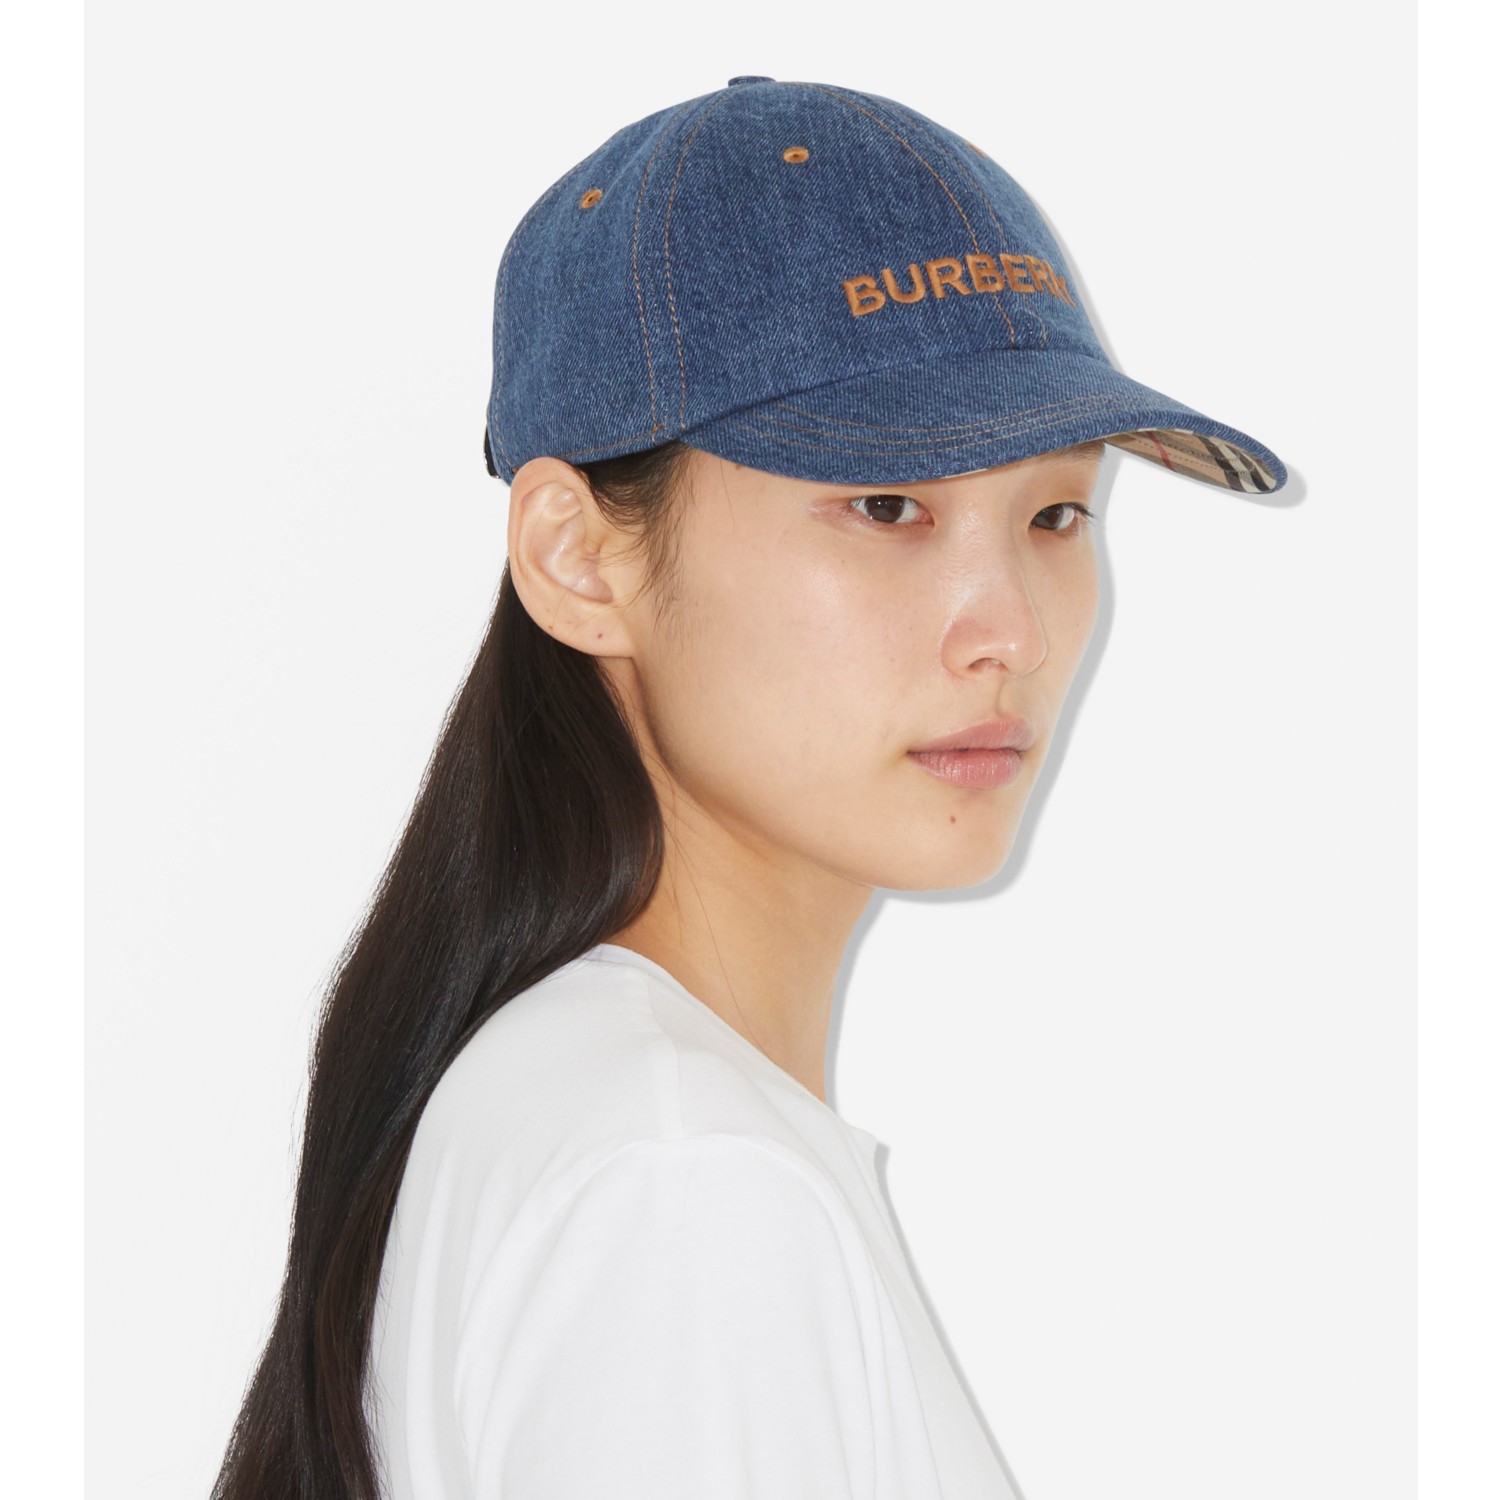 Embroidered Logo Official in indigo Cap Baseball Washed Burberry® Denim 